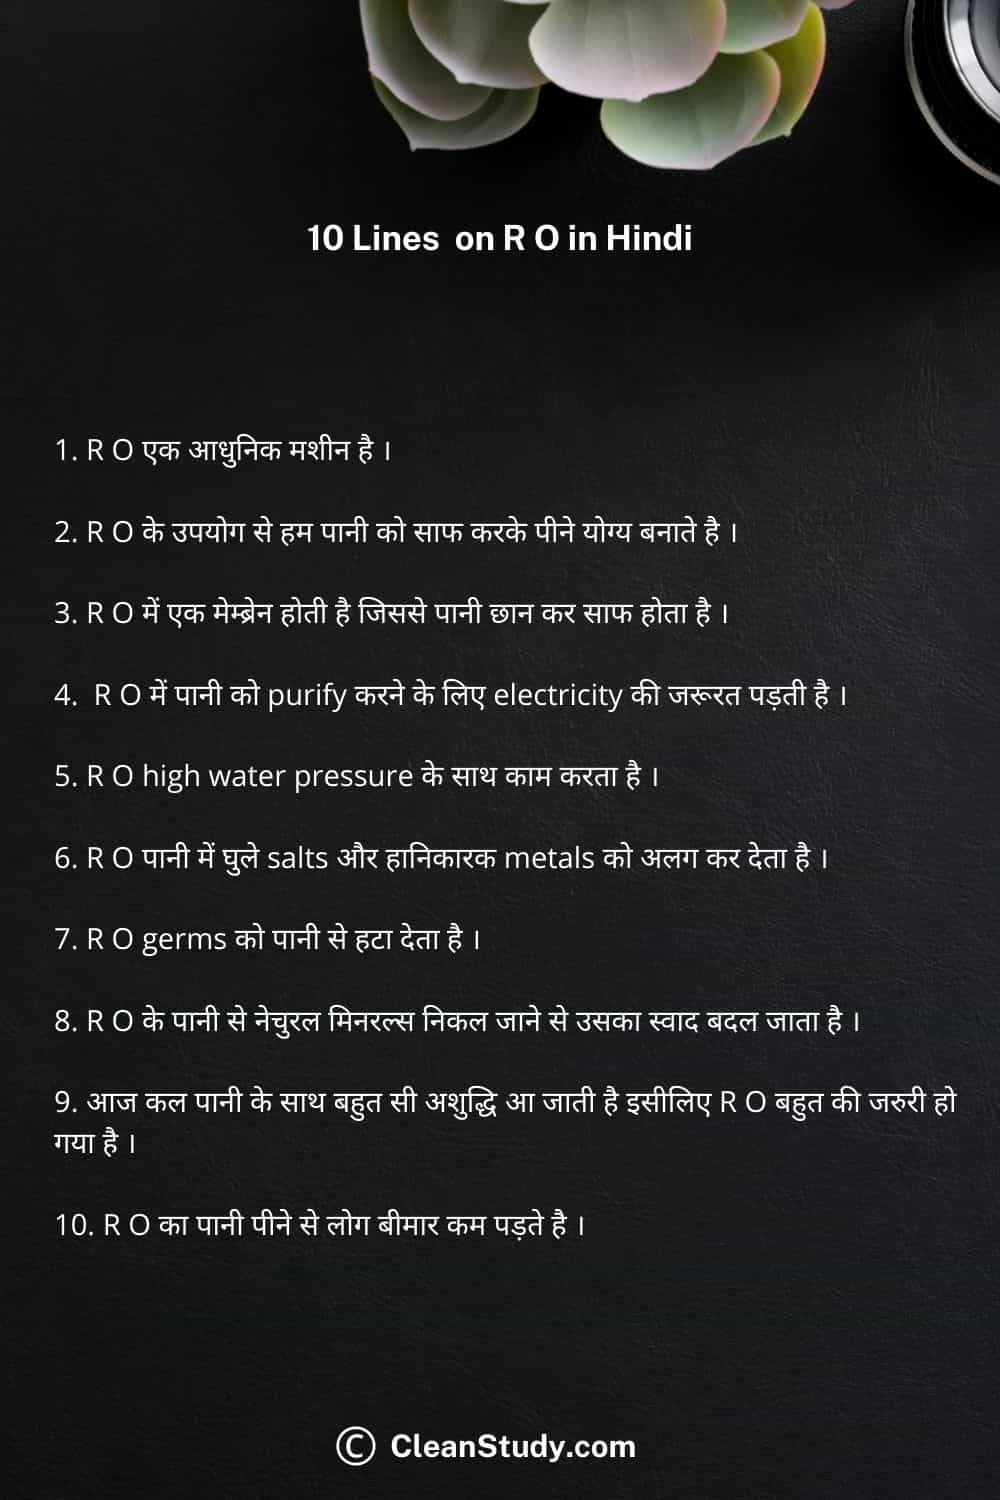 10 lines on R o in hindi